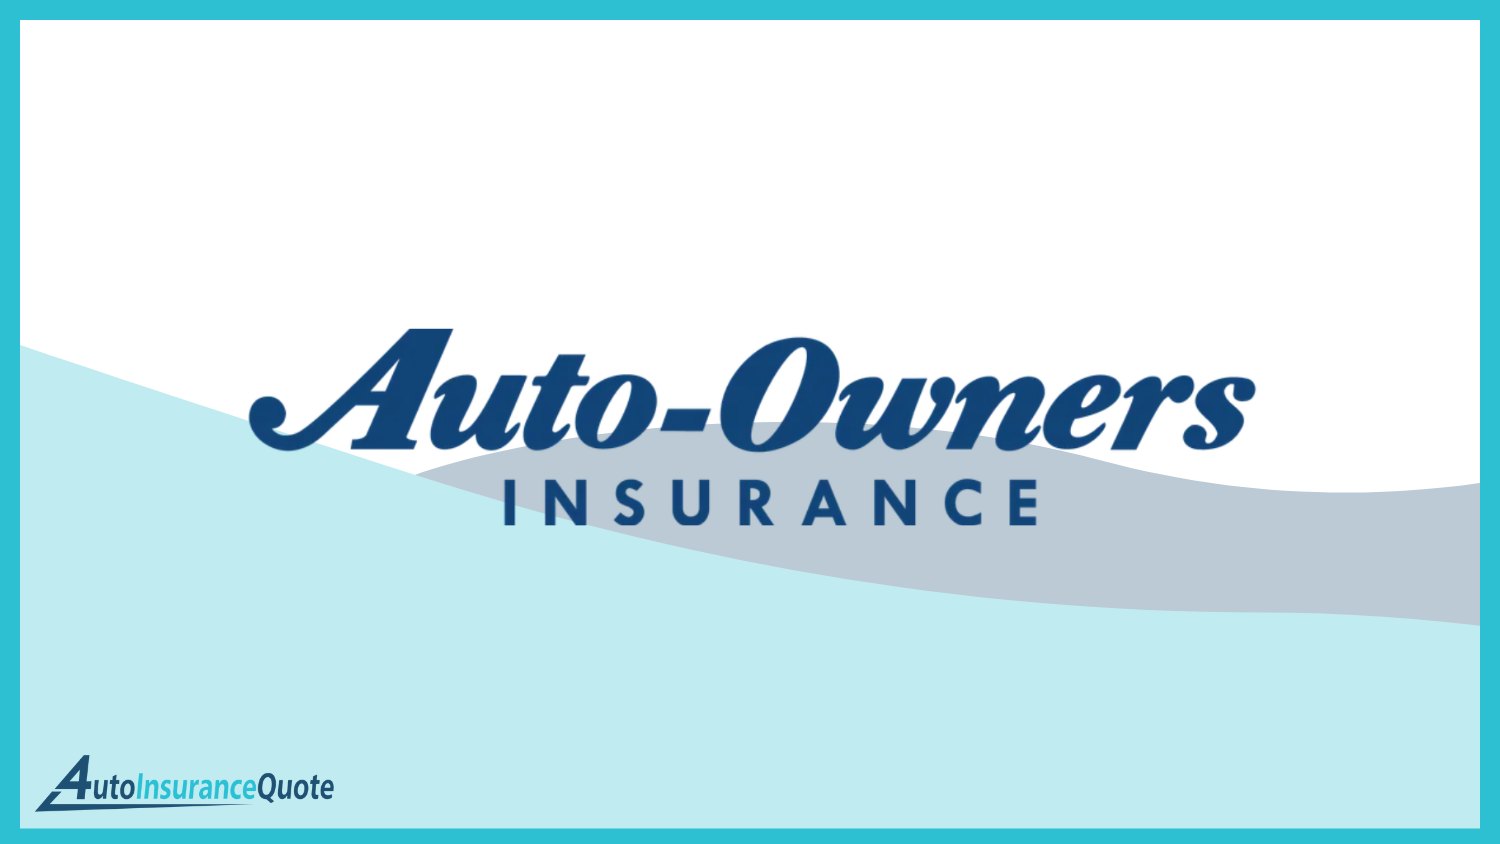 Auto-Owners: Best Auto Insurance Companies